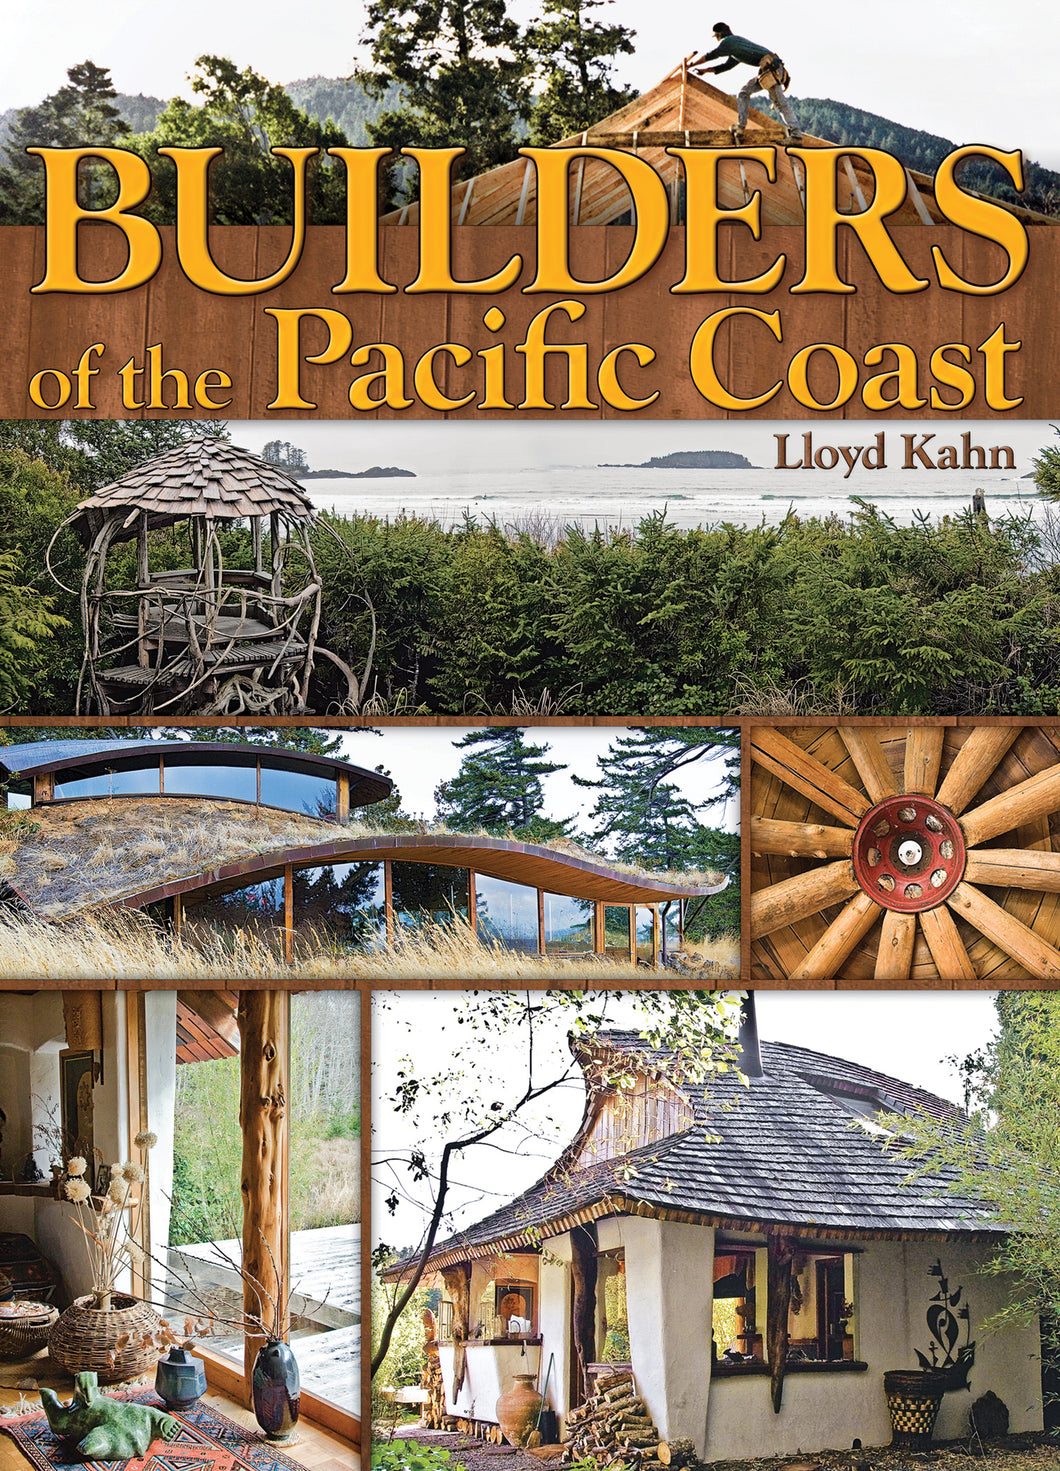 Builders of the Pacific Coast Book by Lloyd Khan